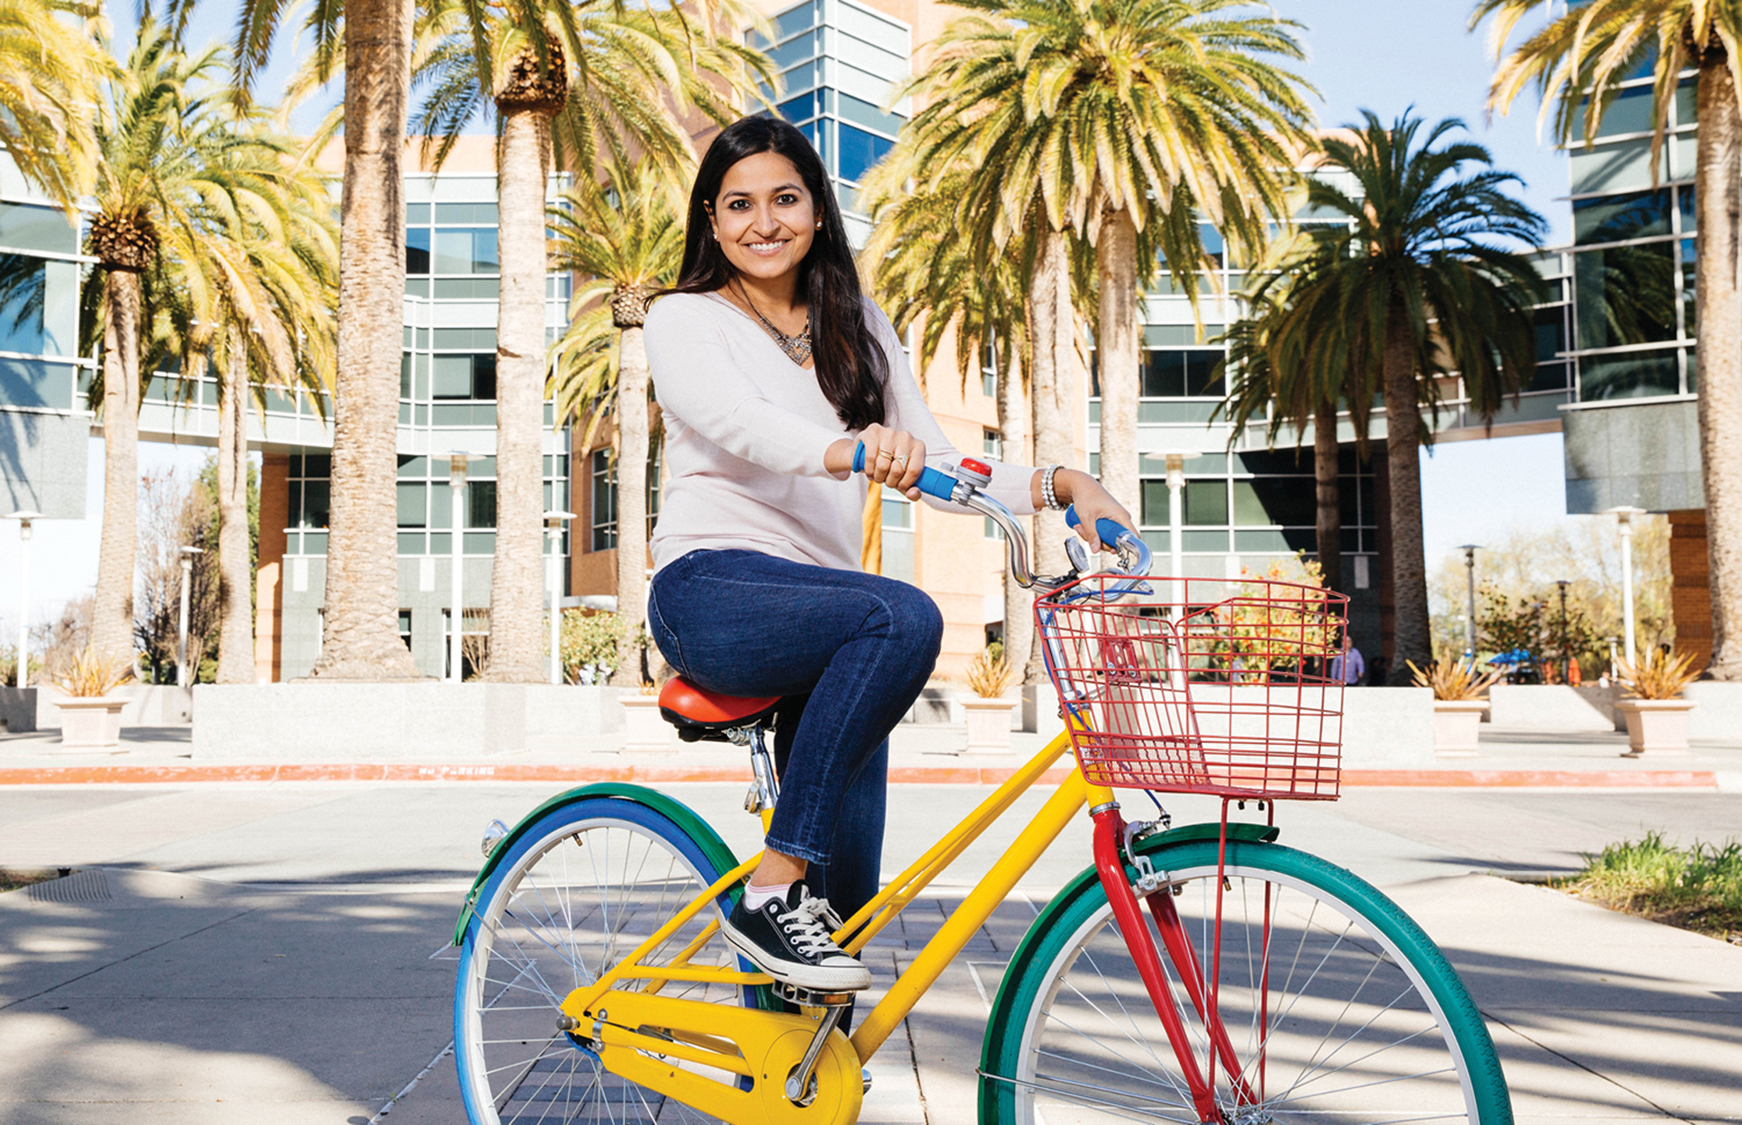 An Interview With Ramya Raghavan, Head of Politics and Causes at Google Image